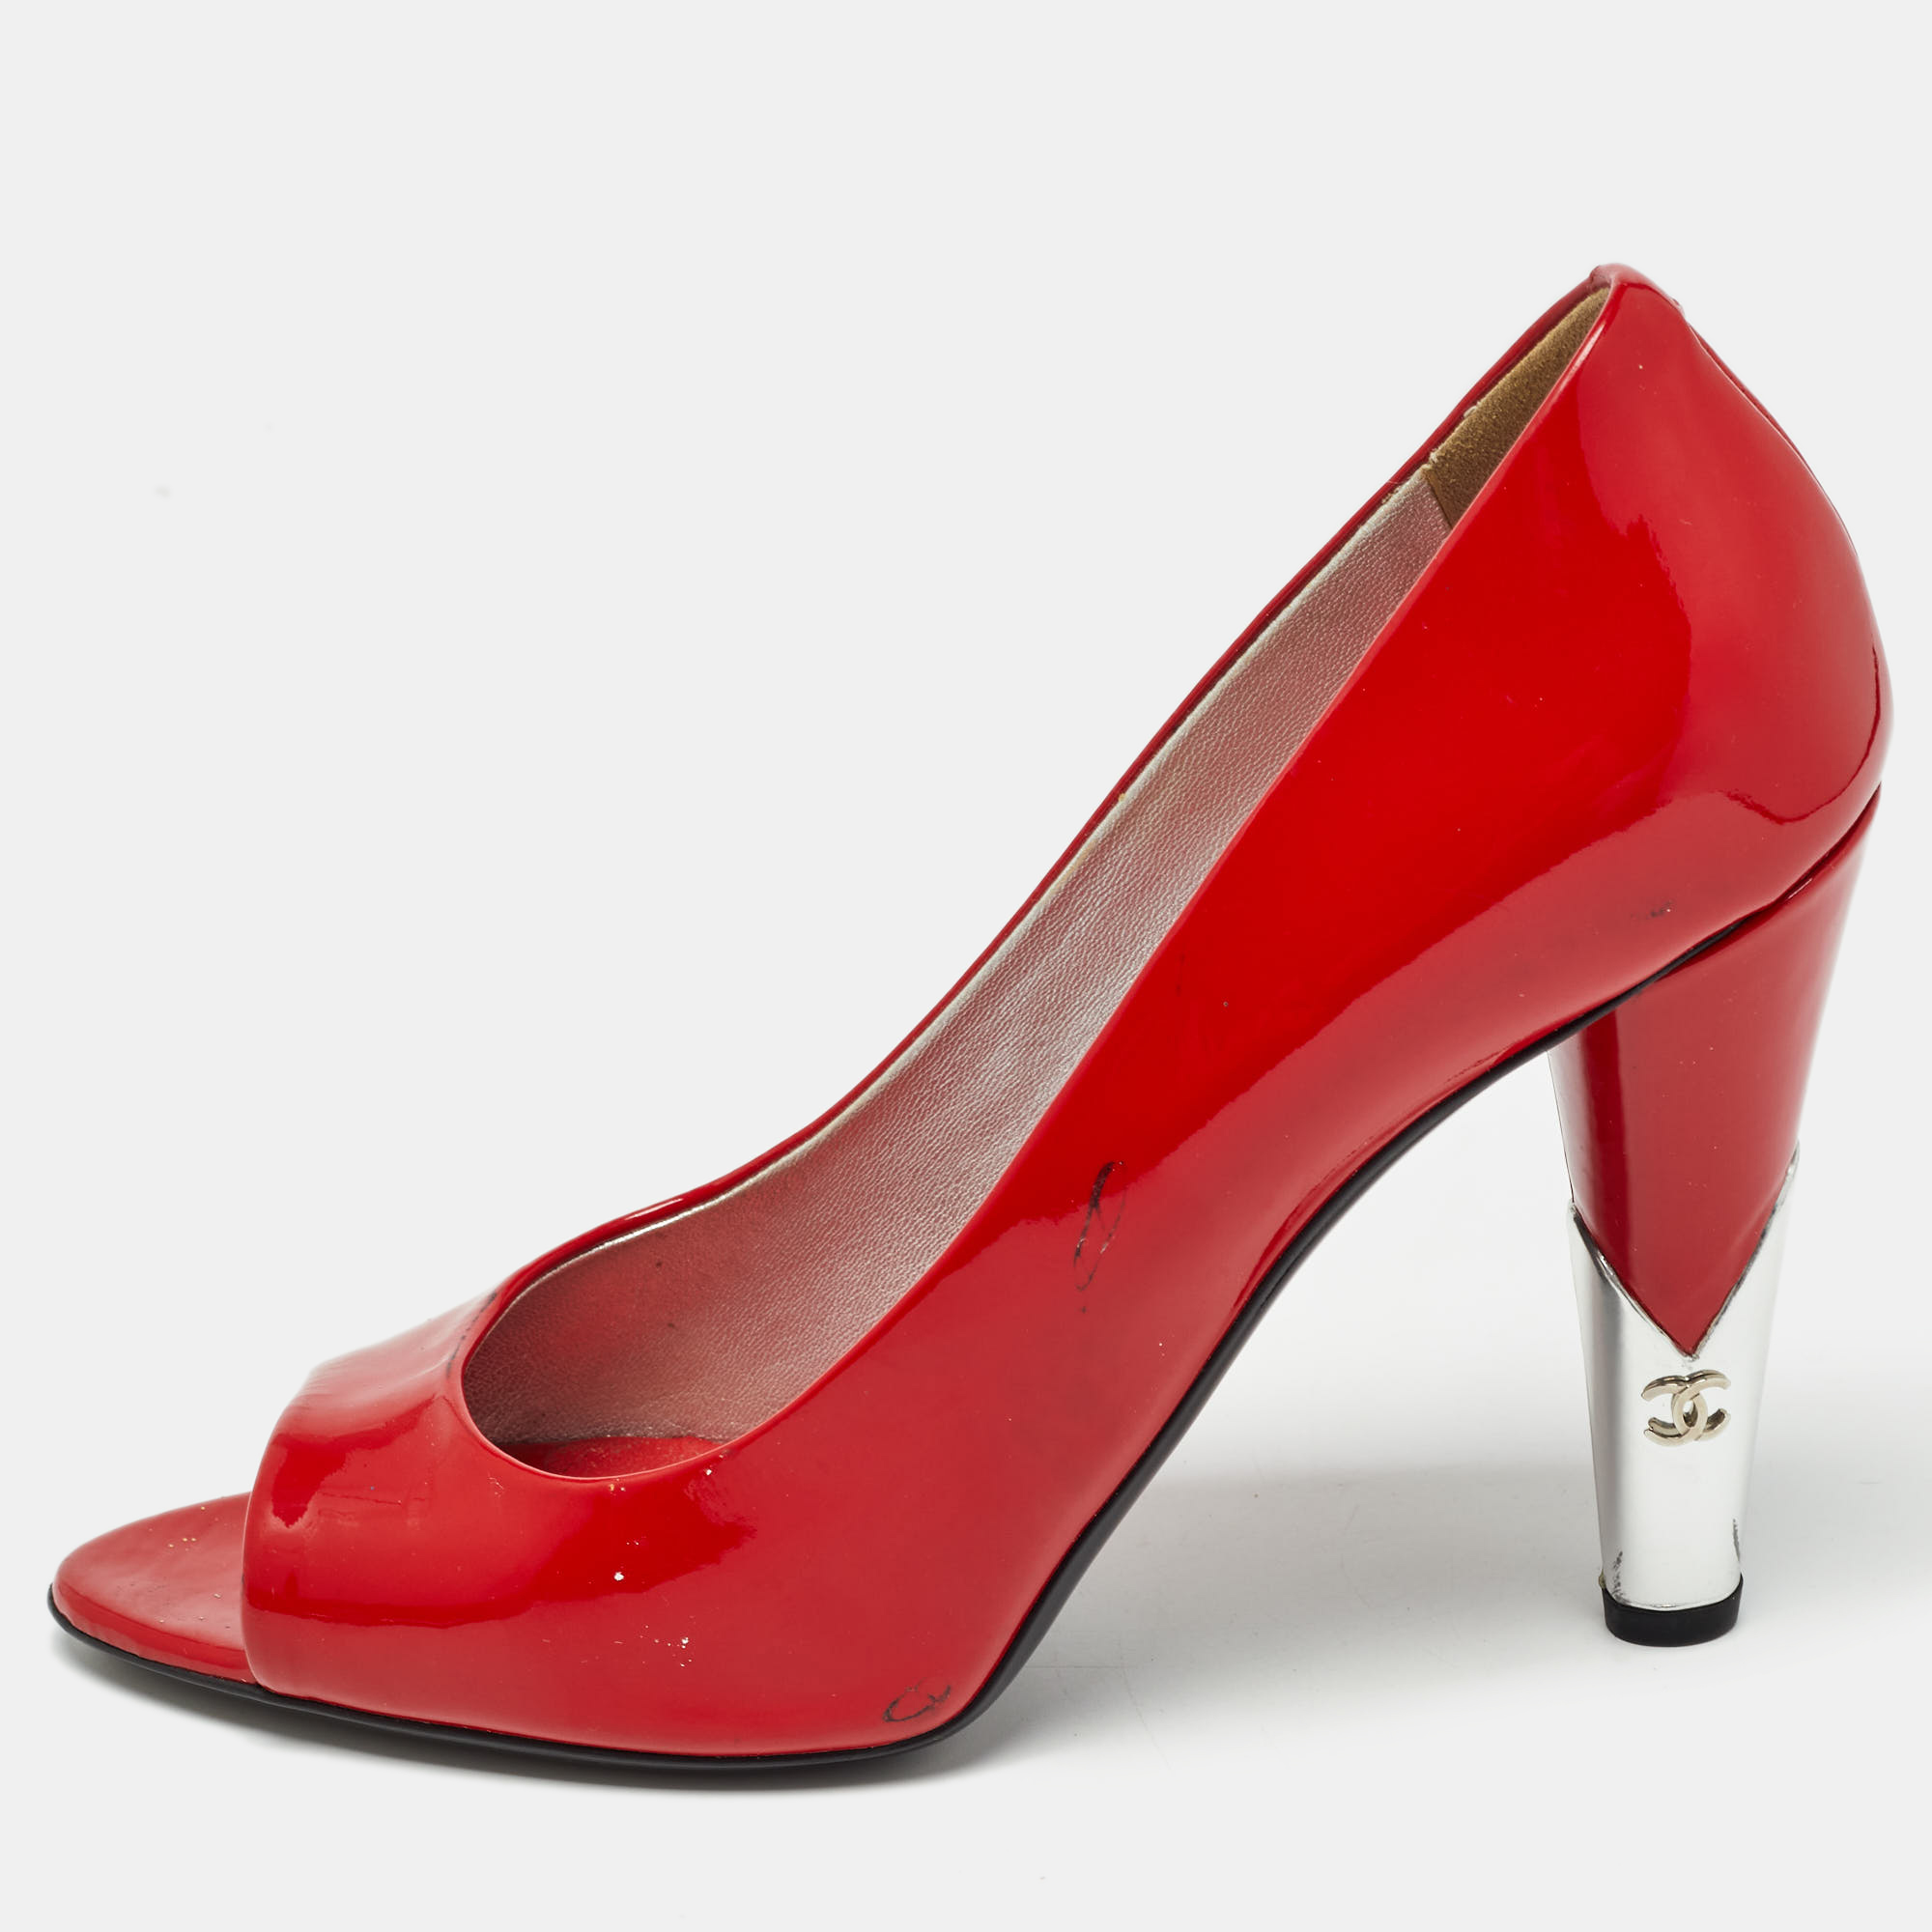 Gift your feet these stunning pumps by Chanel today. Crafted in red patent leather the peep toe pumps are a blend of quality and elegance.